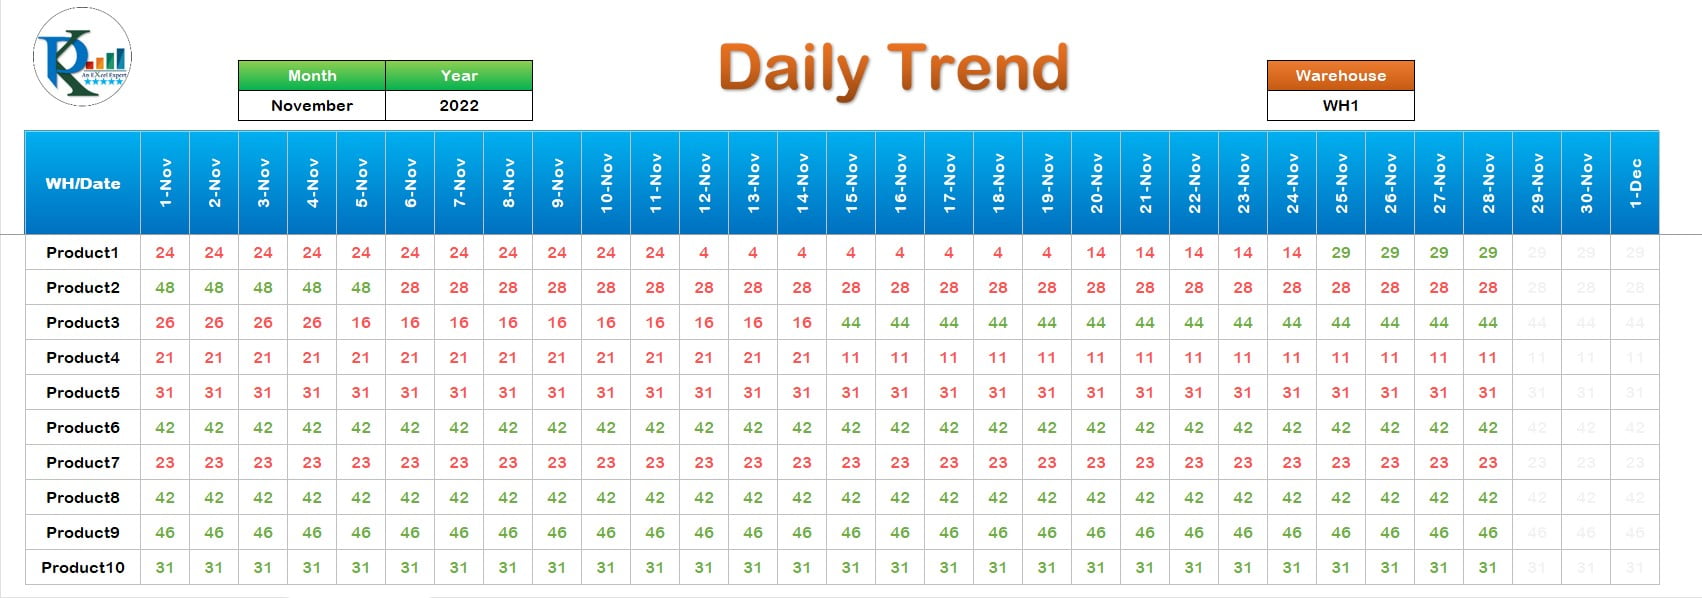 Daily Trend